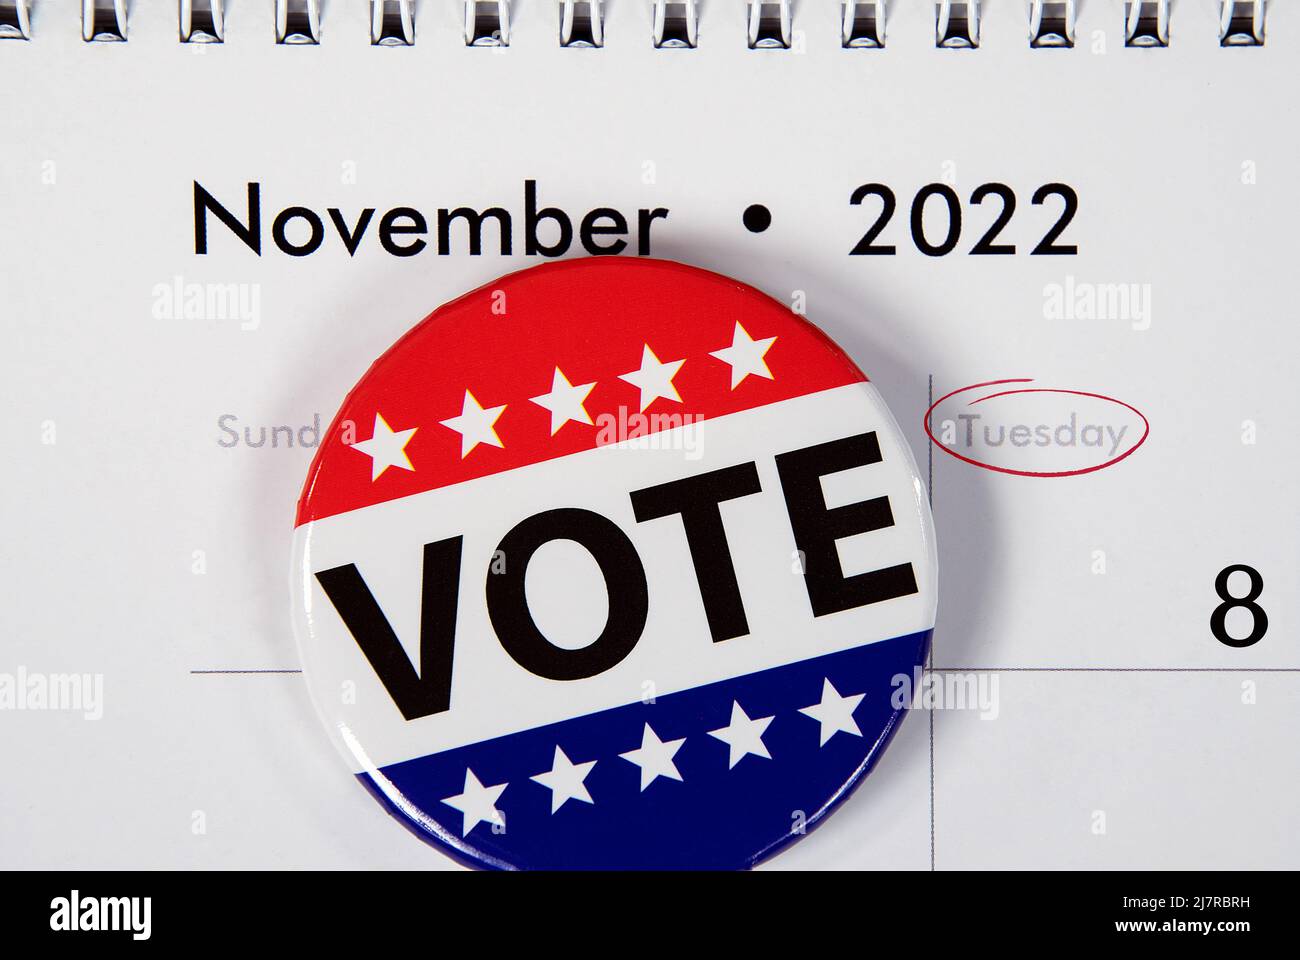 Flag vote pin on November 2022 calendar date for mid-term election event Stock Photo